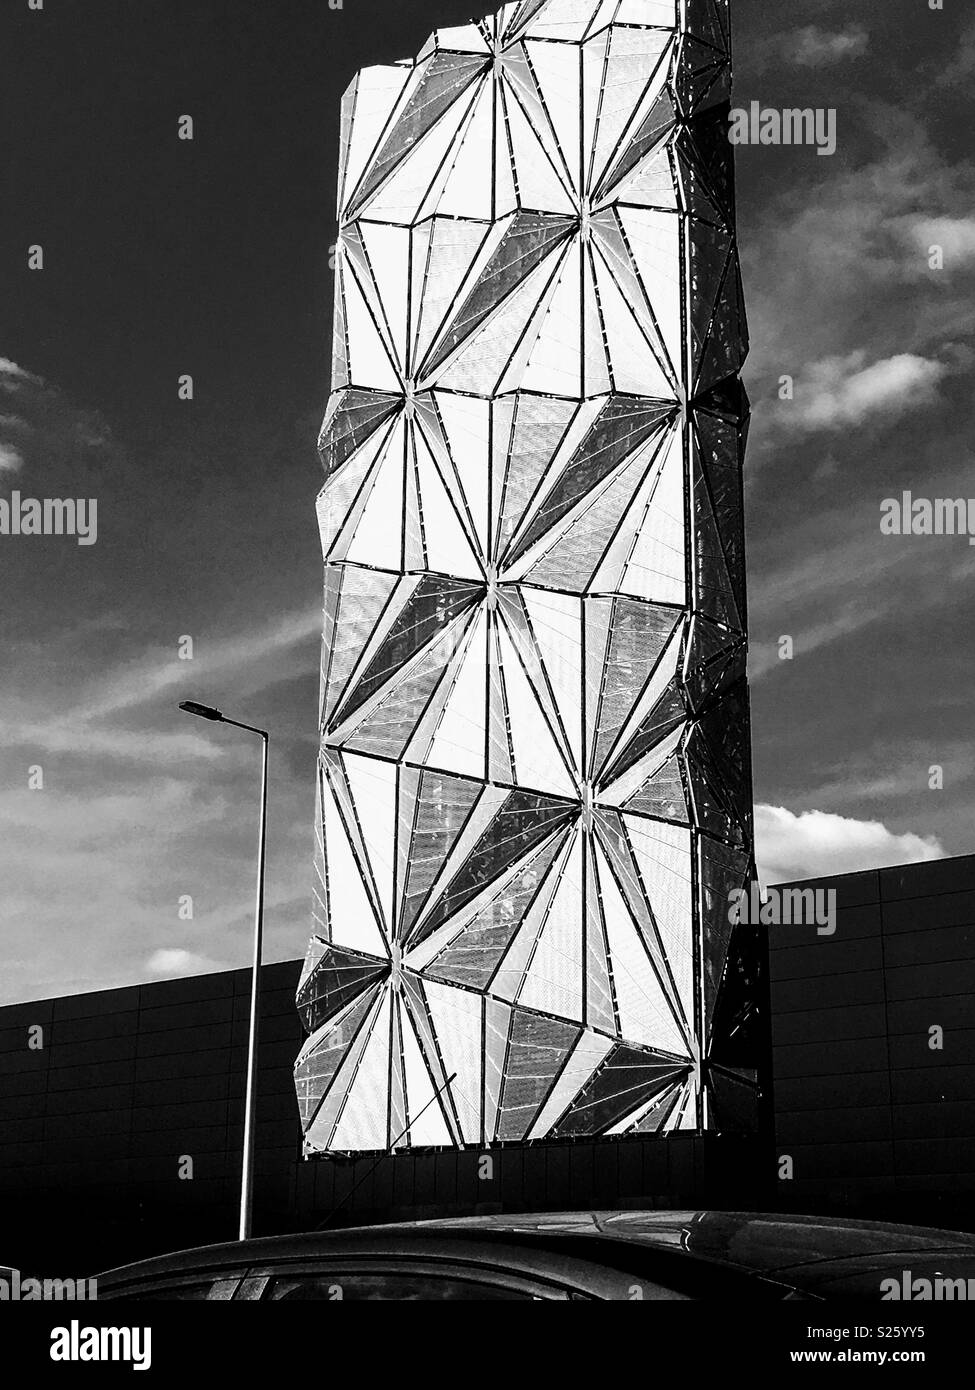 Art Disguise of an Industrial Facility near the Entrance of the Blackwall Tunnel in London Stock Photo